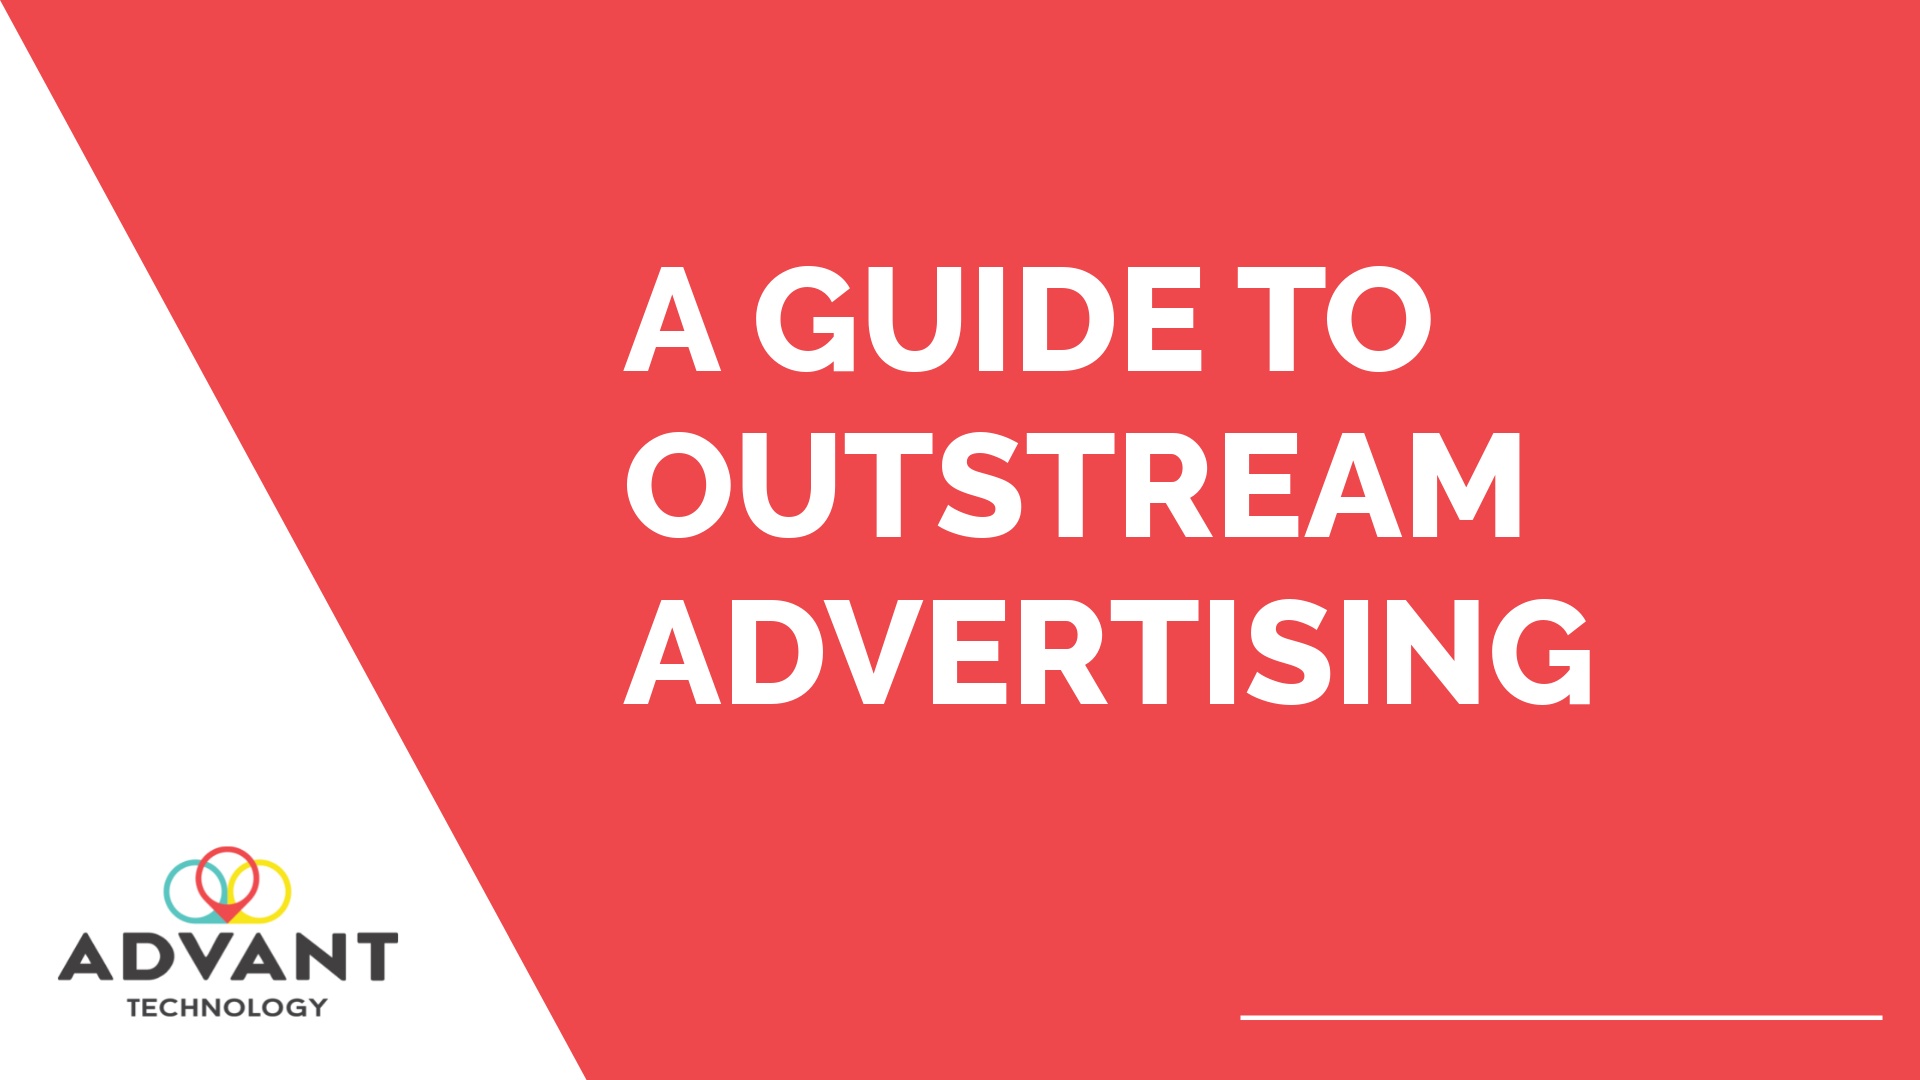 A Guide To Outstream Advertising